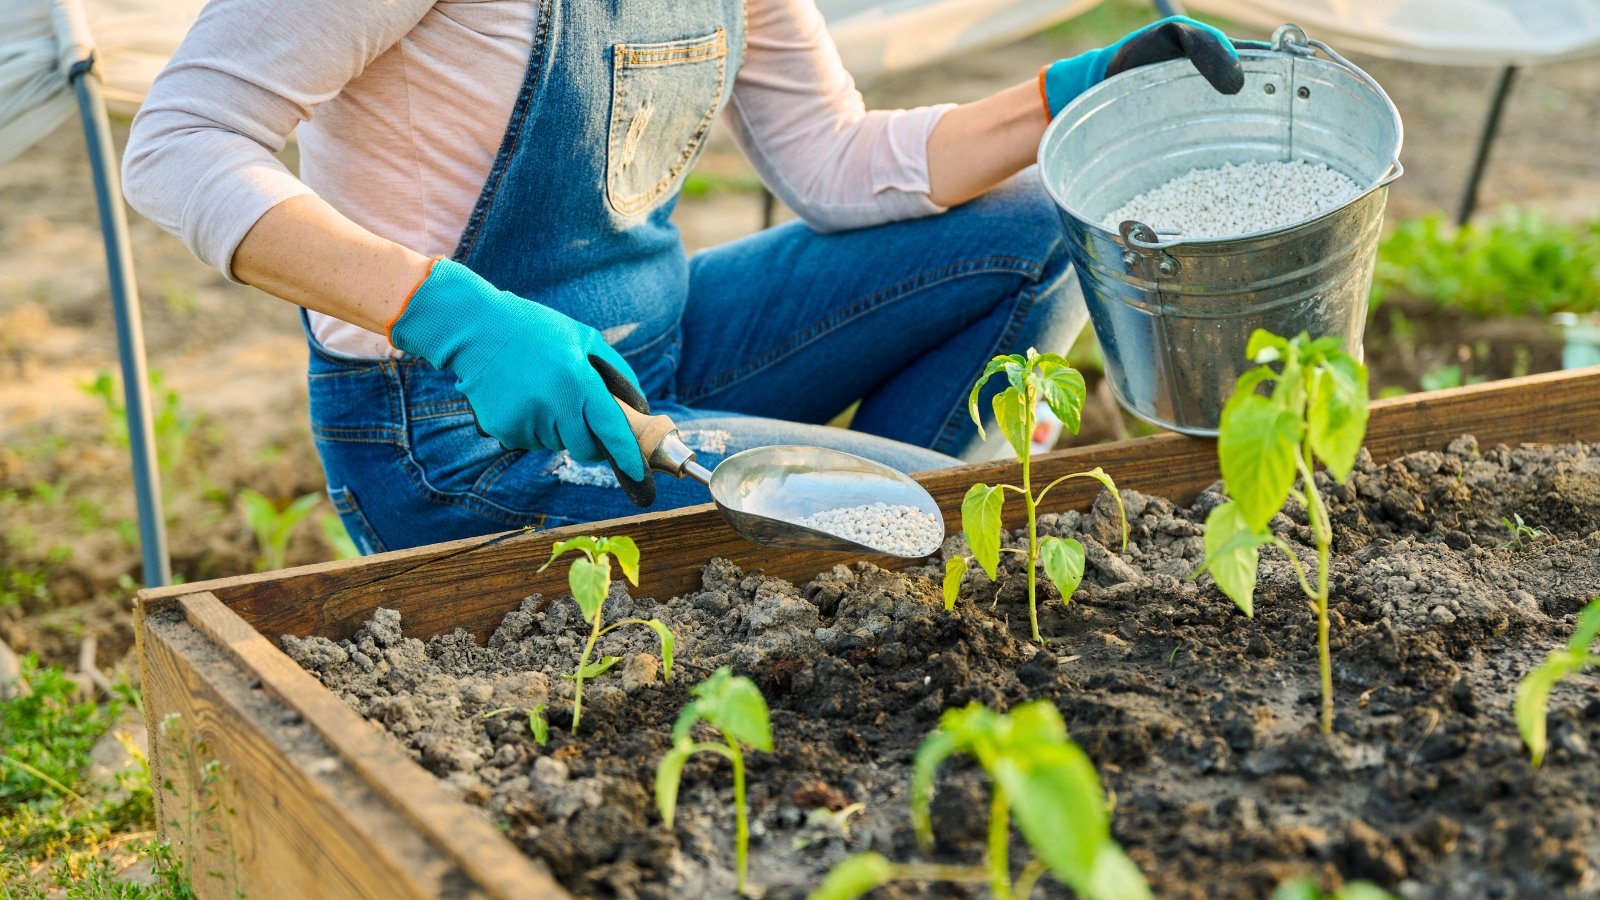 Close-up of a woman dressed in denim overalls fertilizing pepper seedlings in a raised garden bed with gray granular fertilizer.